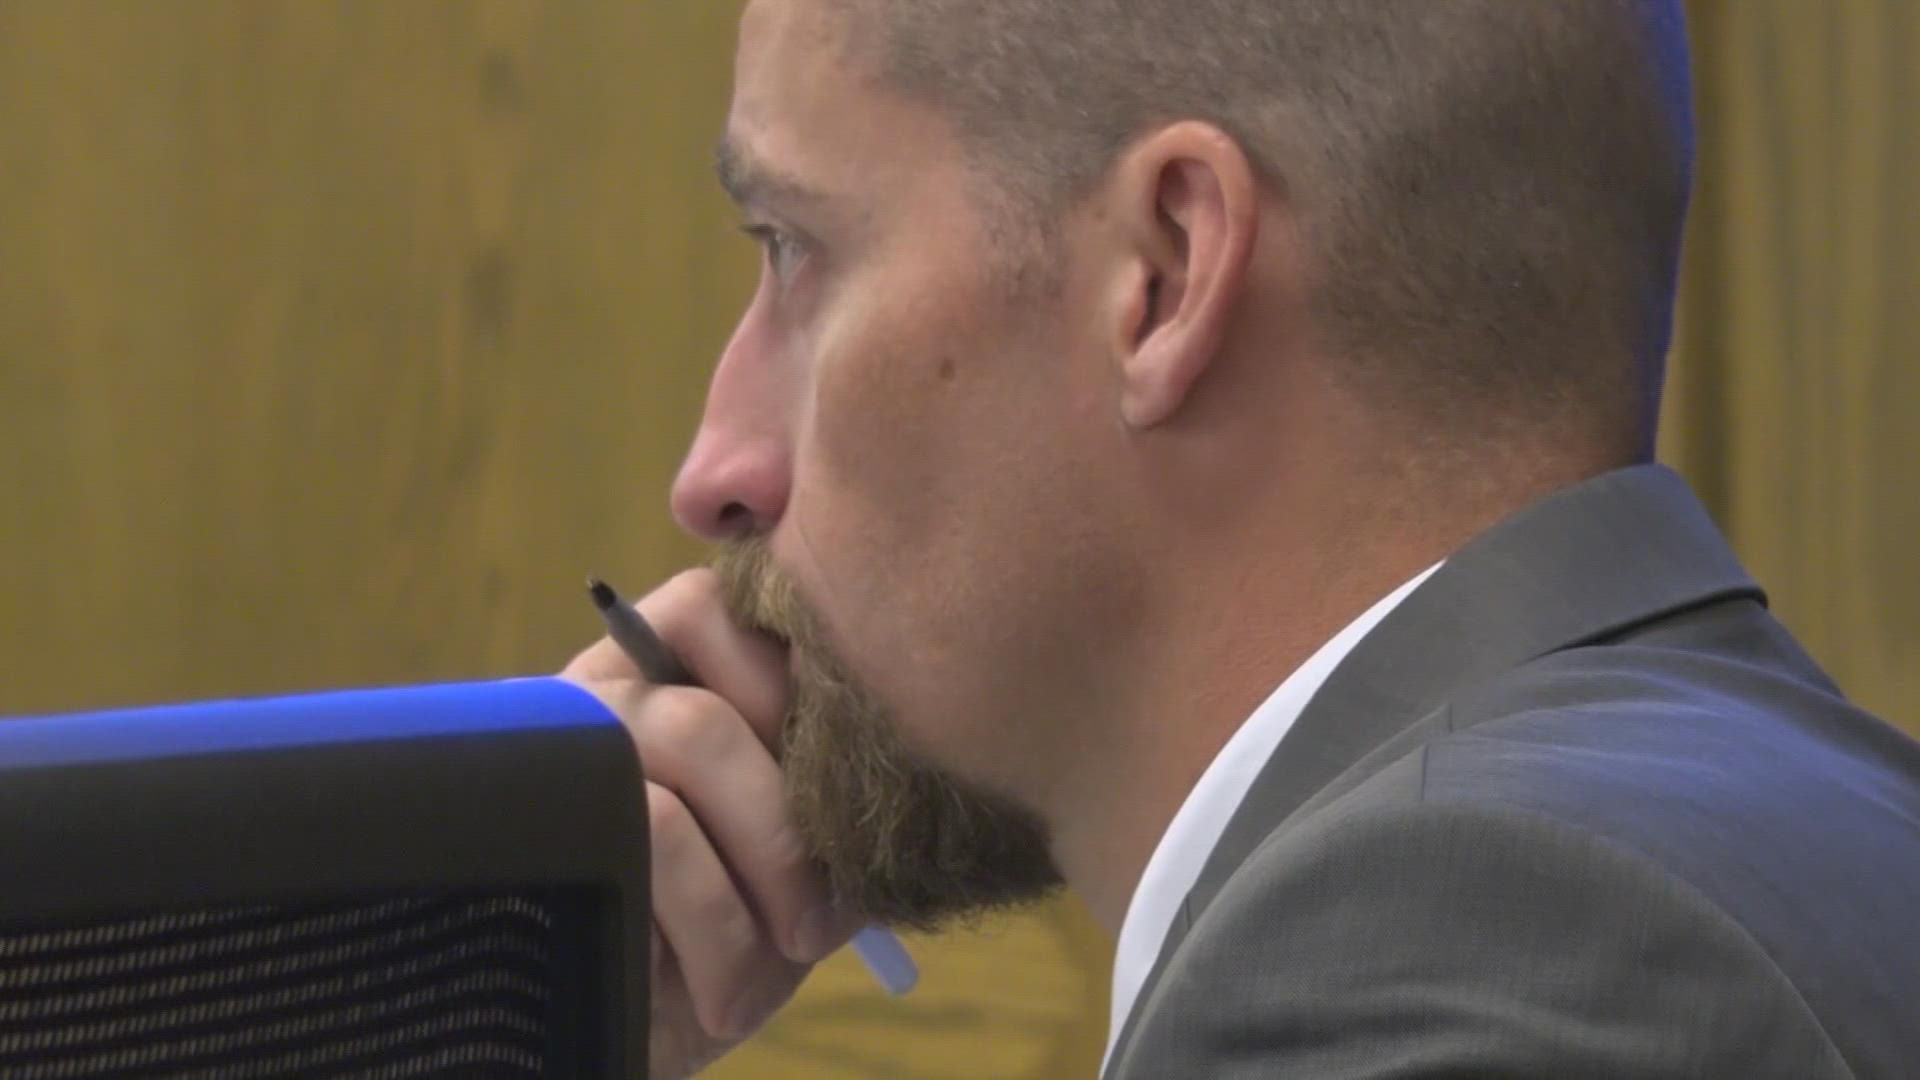 Former police officer Nathan Nash's trial continued. Medical experts, Spokane law enforcement and a 2019 interview were presented during trial.